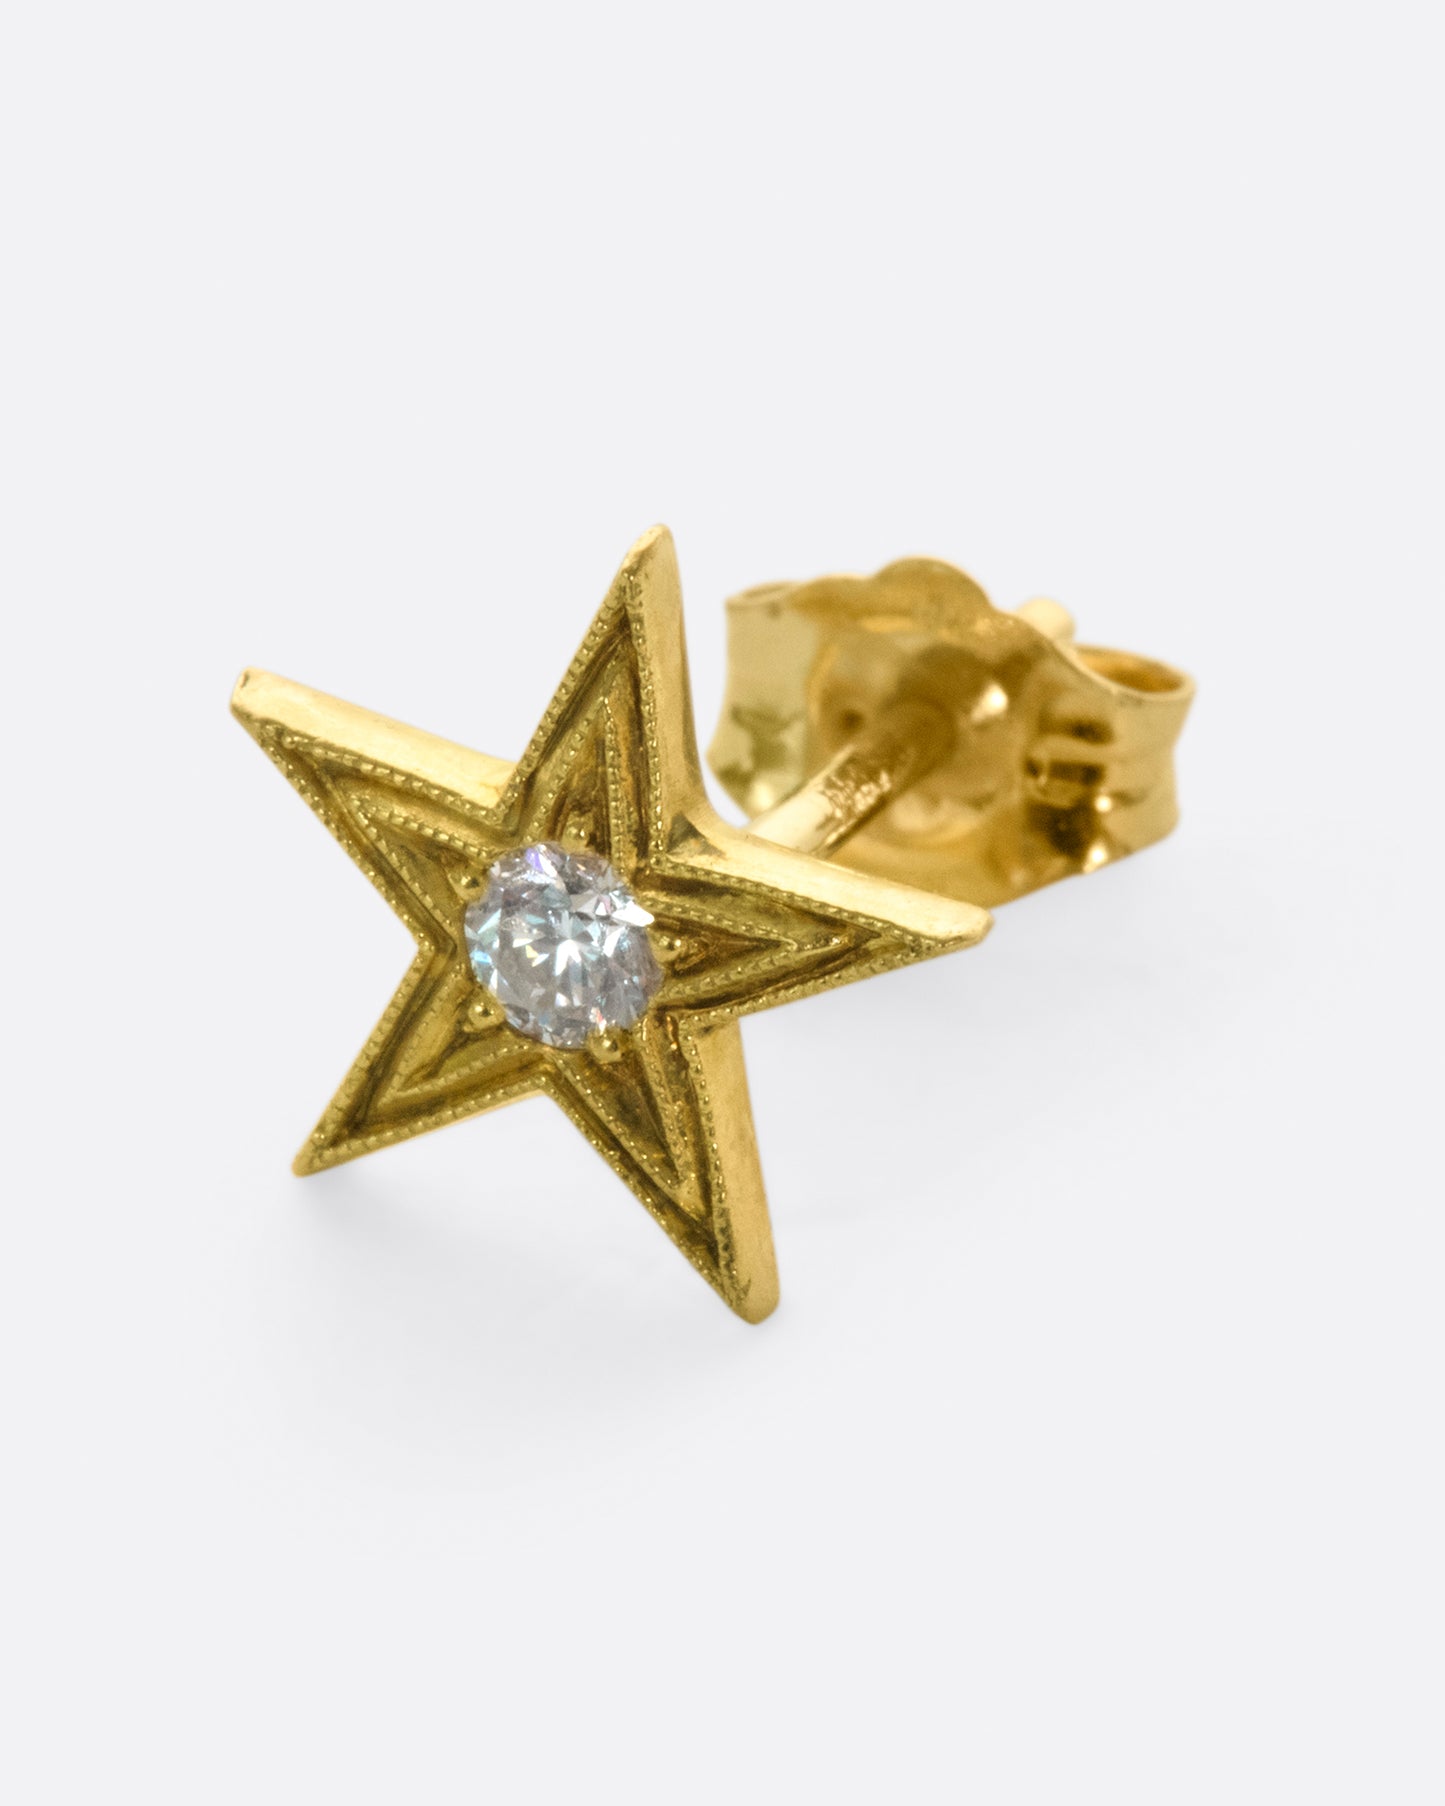 This earring is one of the many varieties of stars in Anthony Lent's work, this time a bit larger and more traditional.